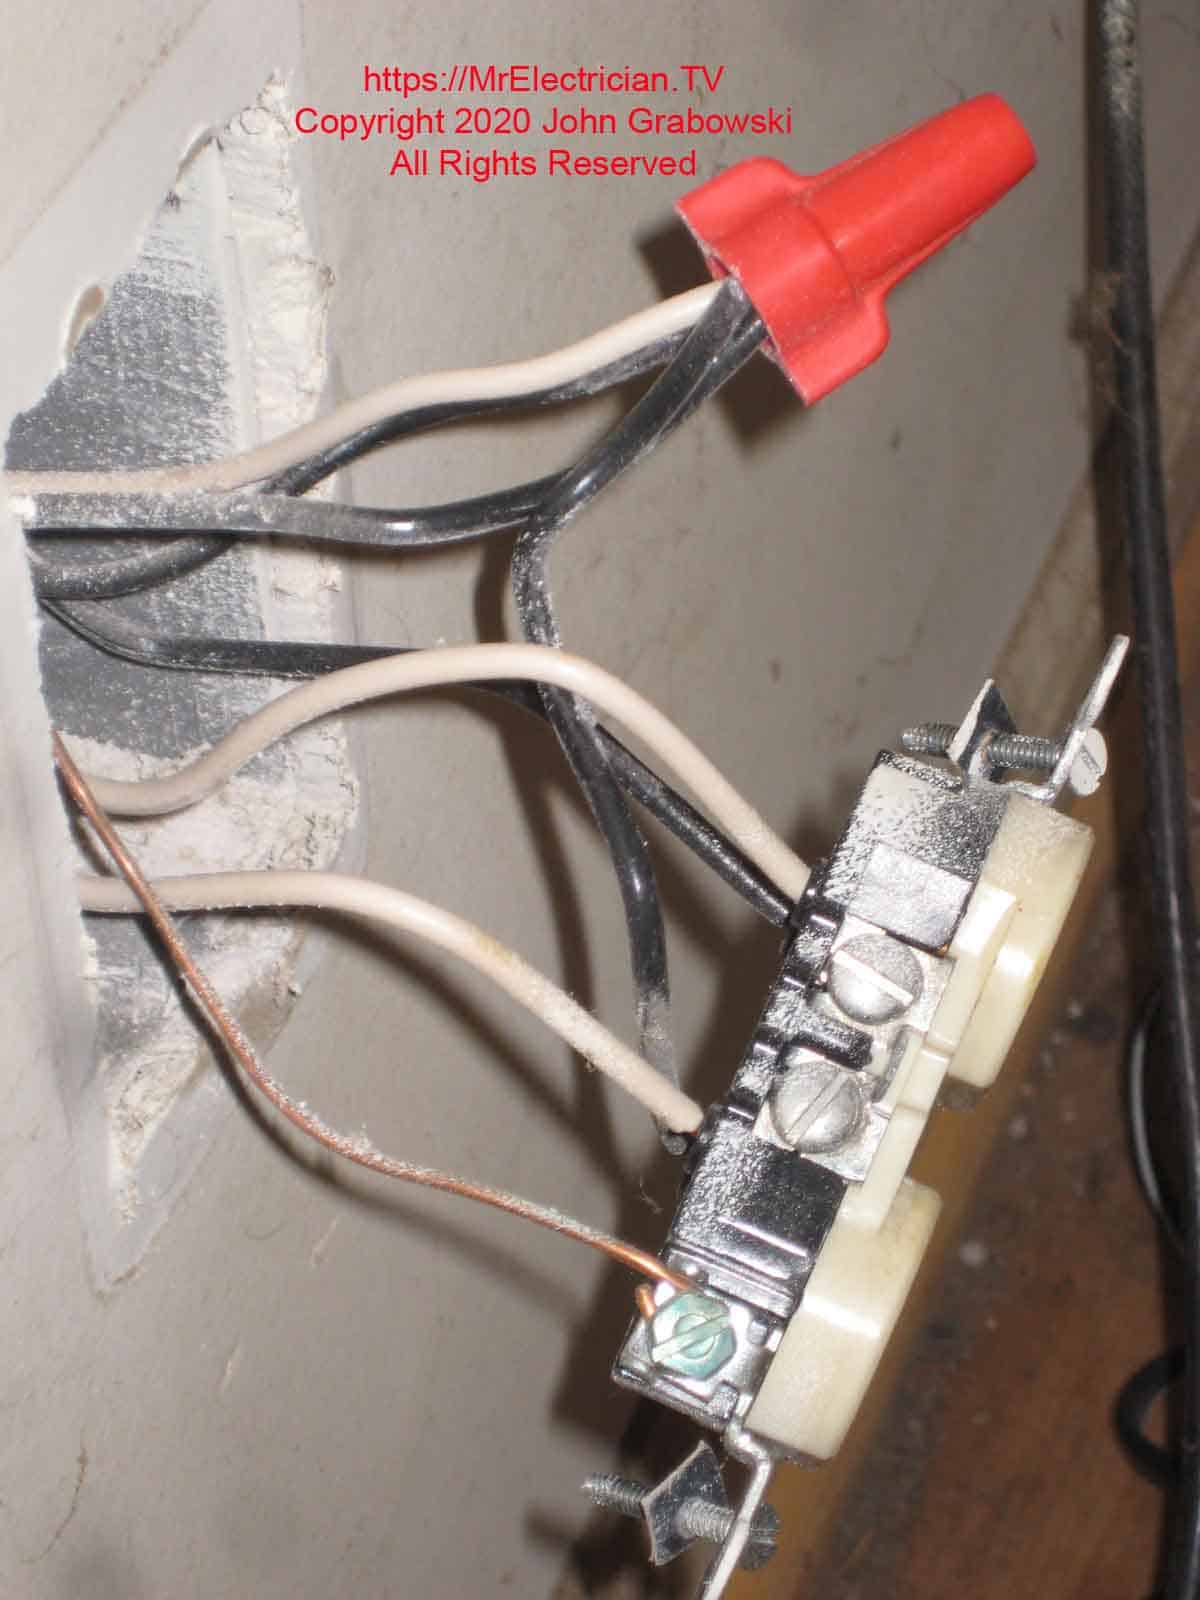 A half-switched outlet with a white wire LINE feed to the wall switch.